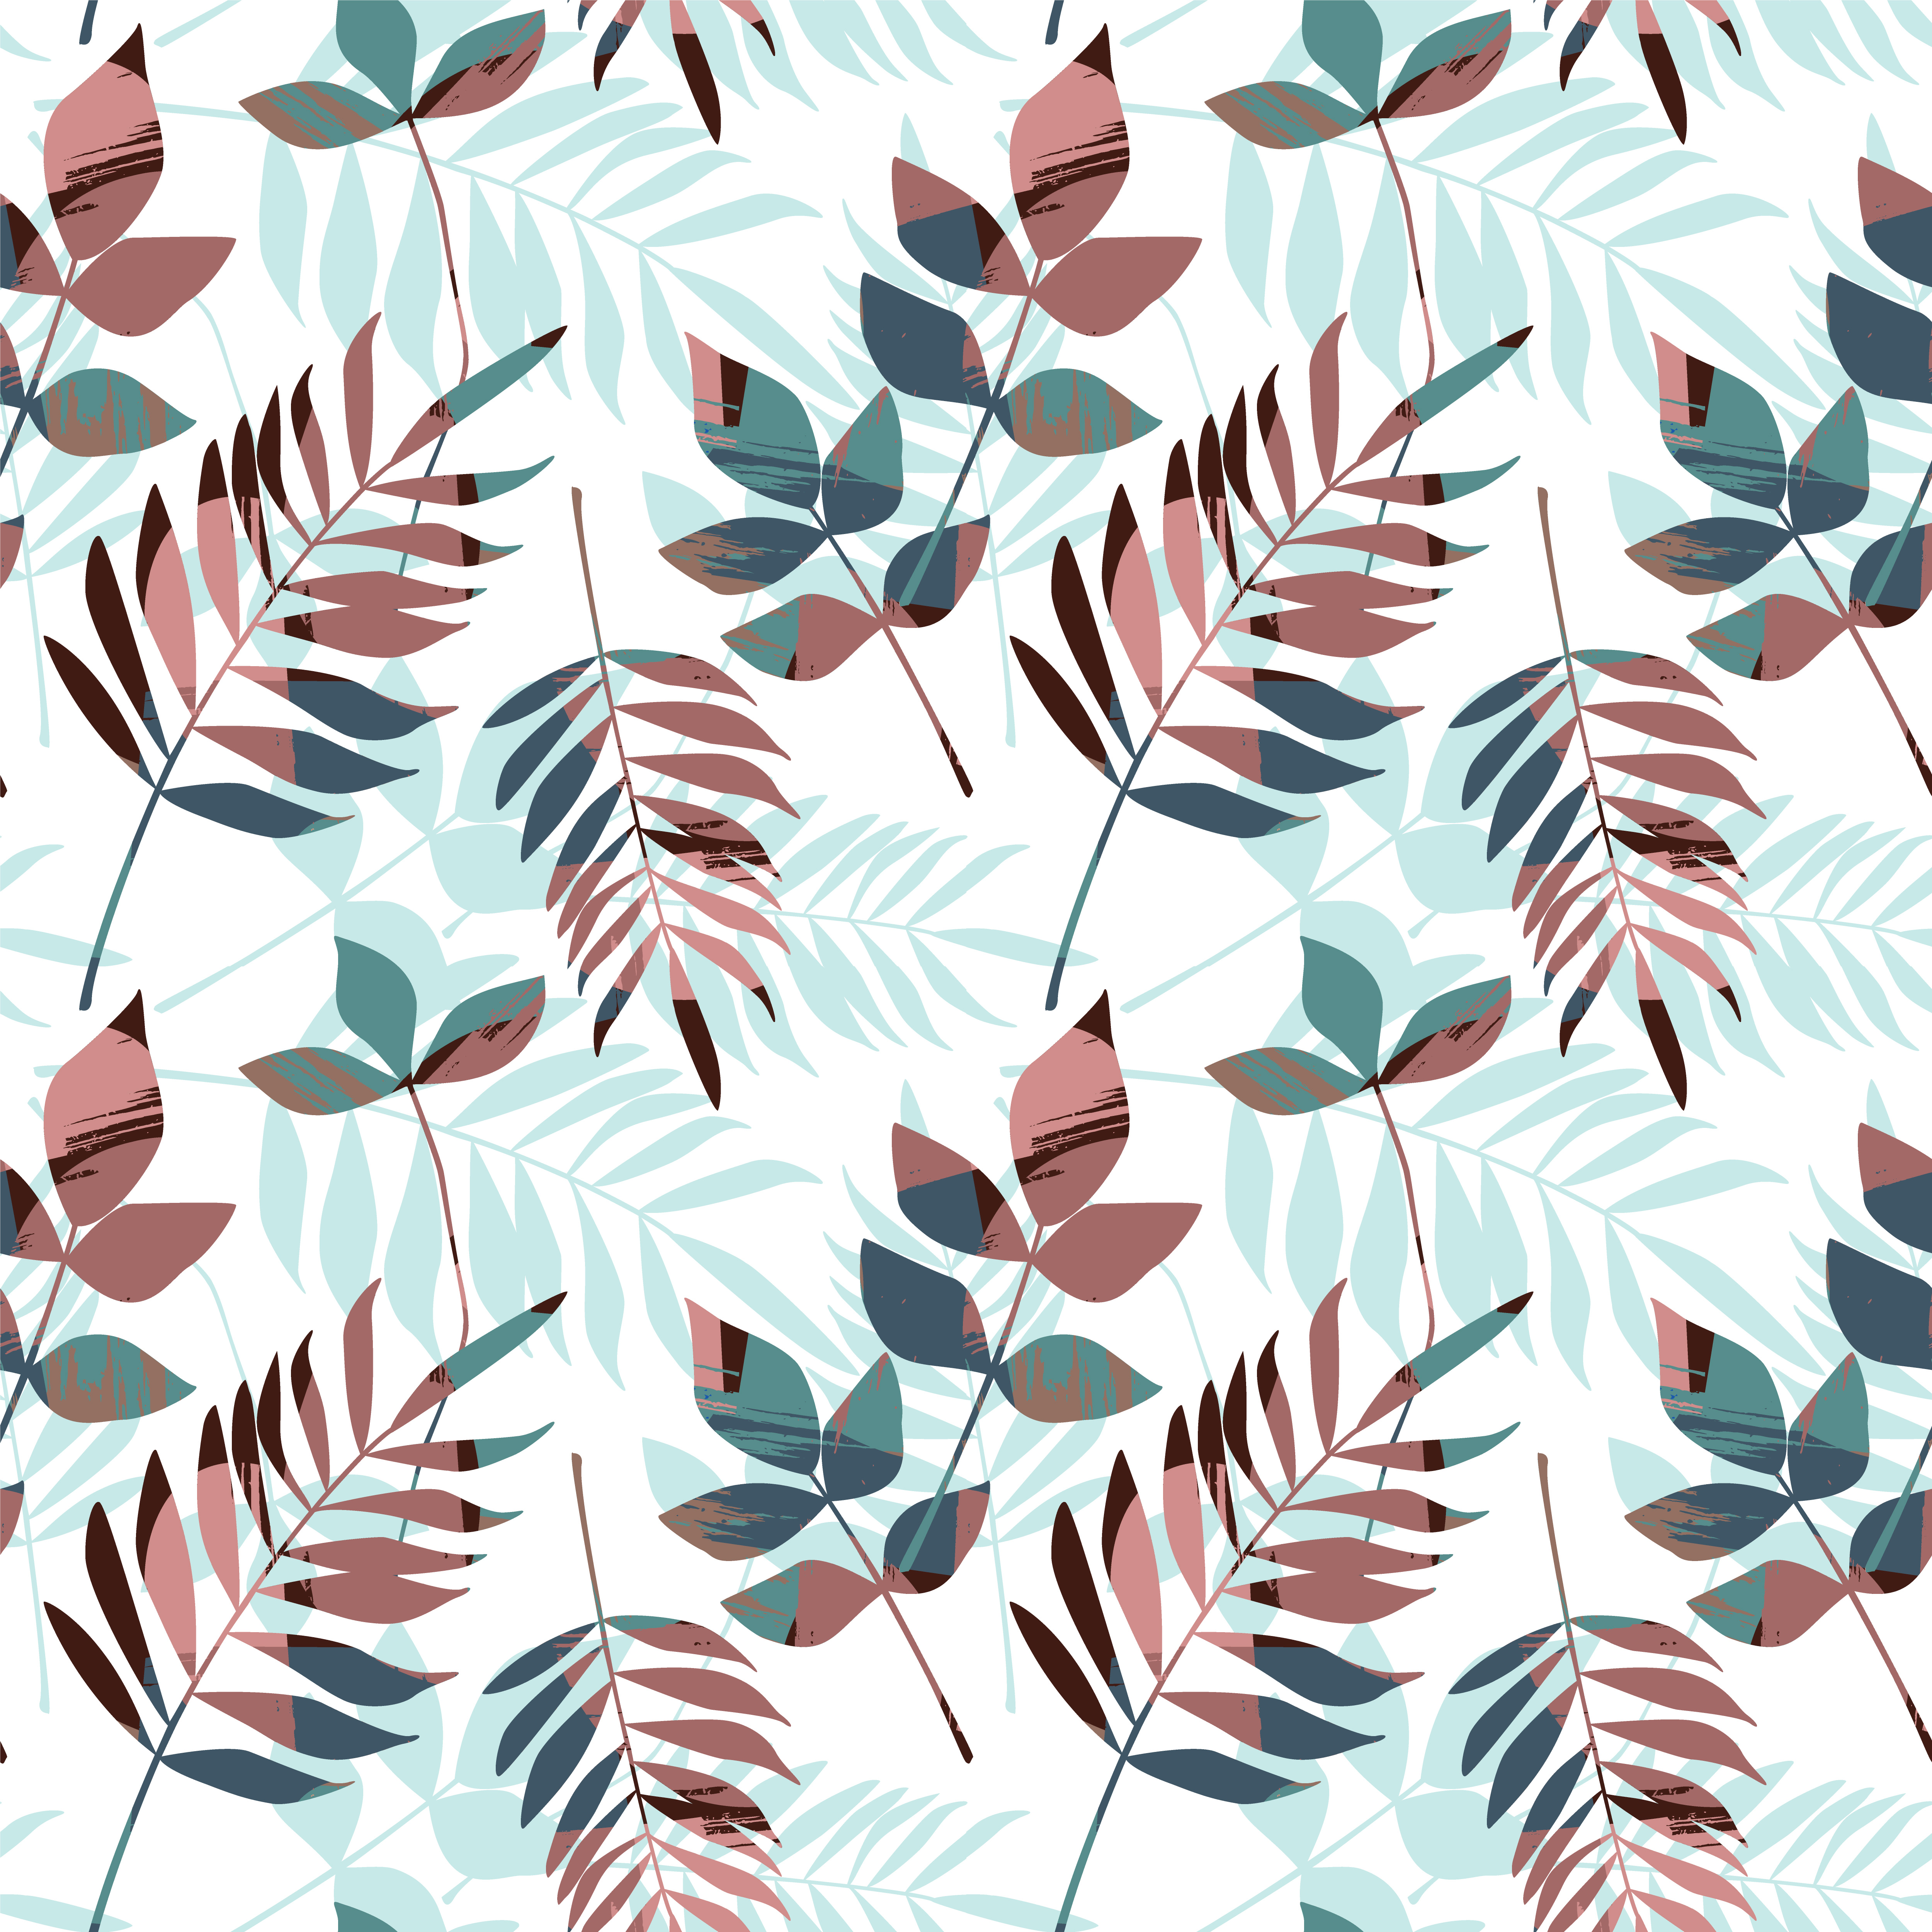 Abstract floral seamless pattern with trendy hand drawn textures